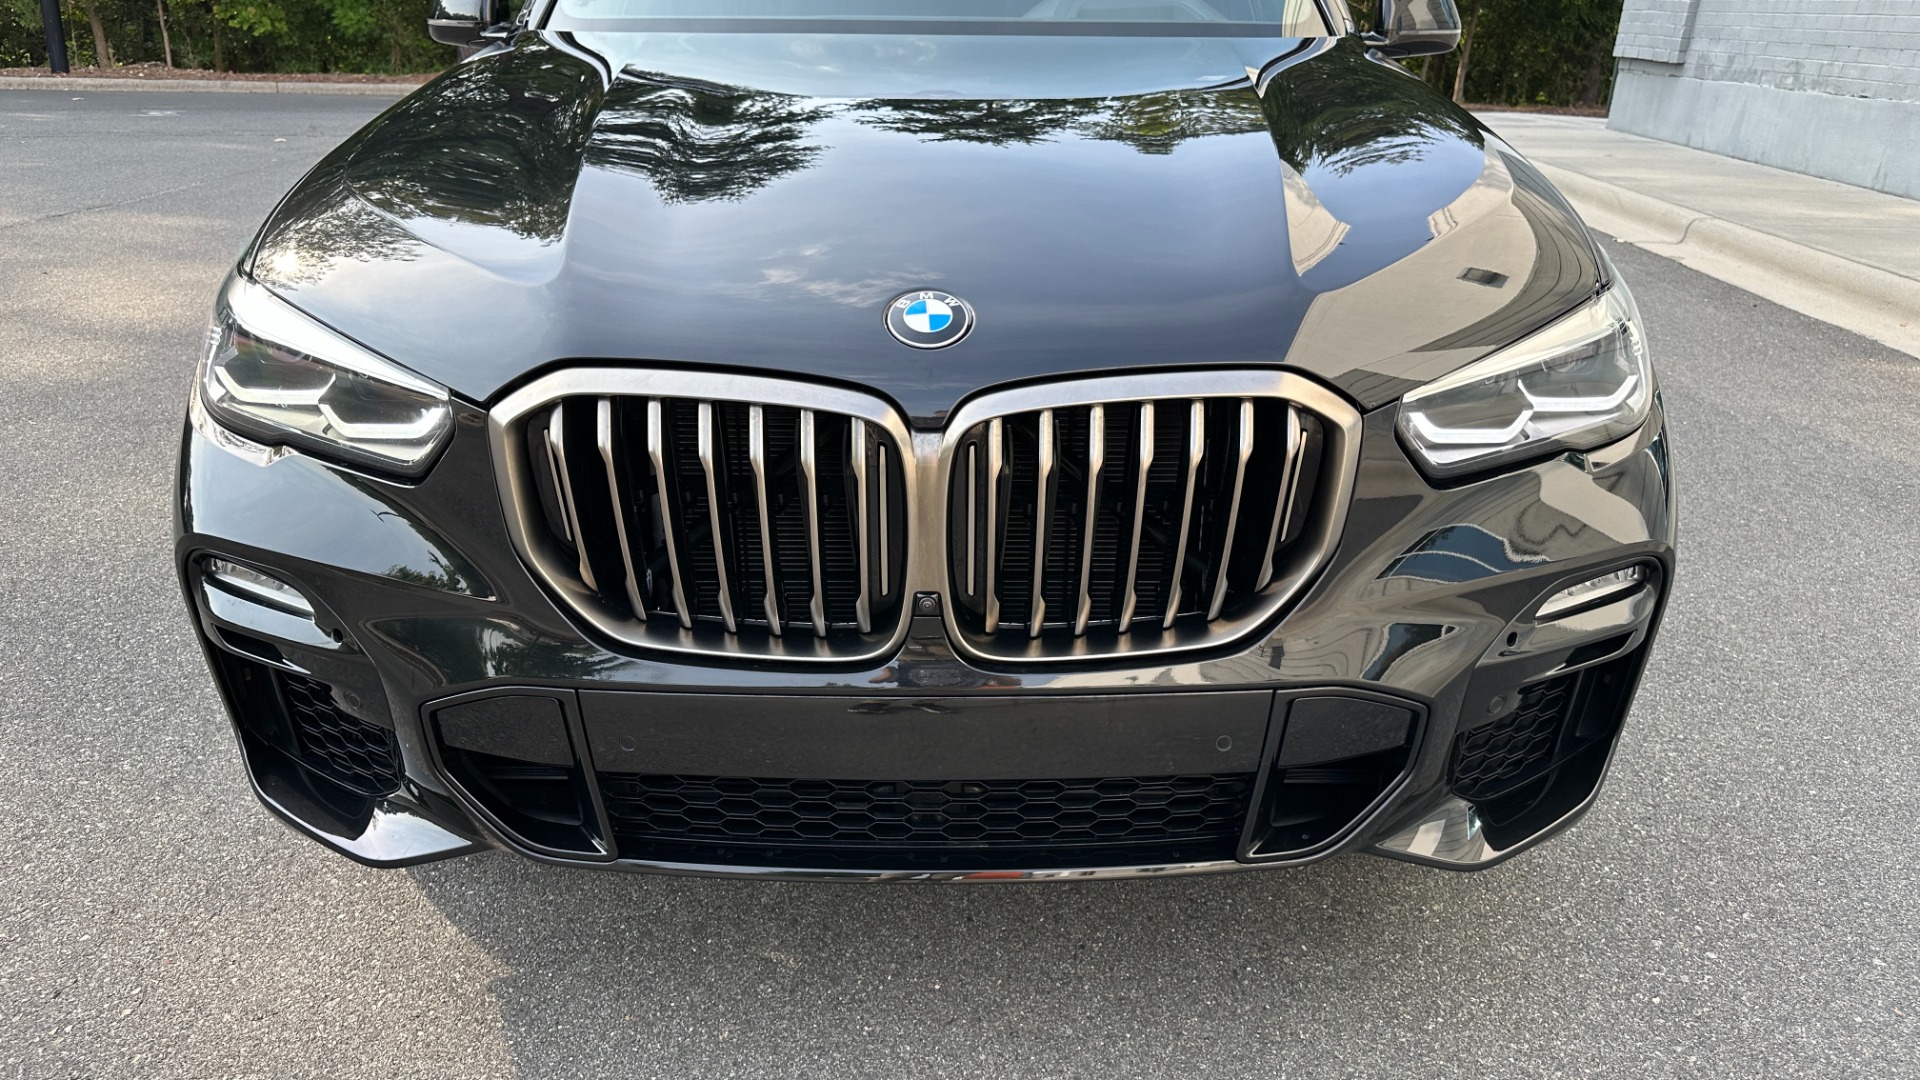 Used 2020 BMW X5 M50i / PREMIUM / TRAILER HITCH / BLACK TRIM / PARKING ASSIST for sale $54,995 at Formula Imports in Charlotte NC 28227 9